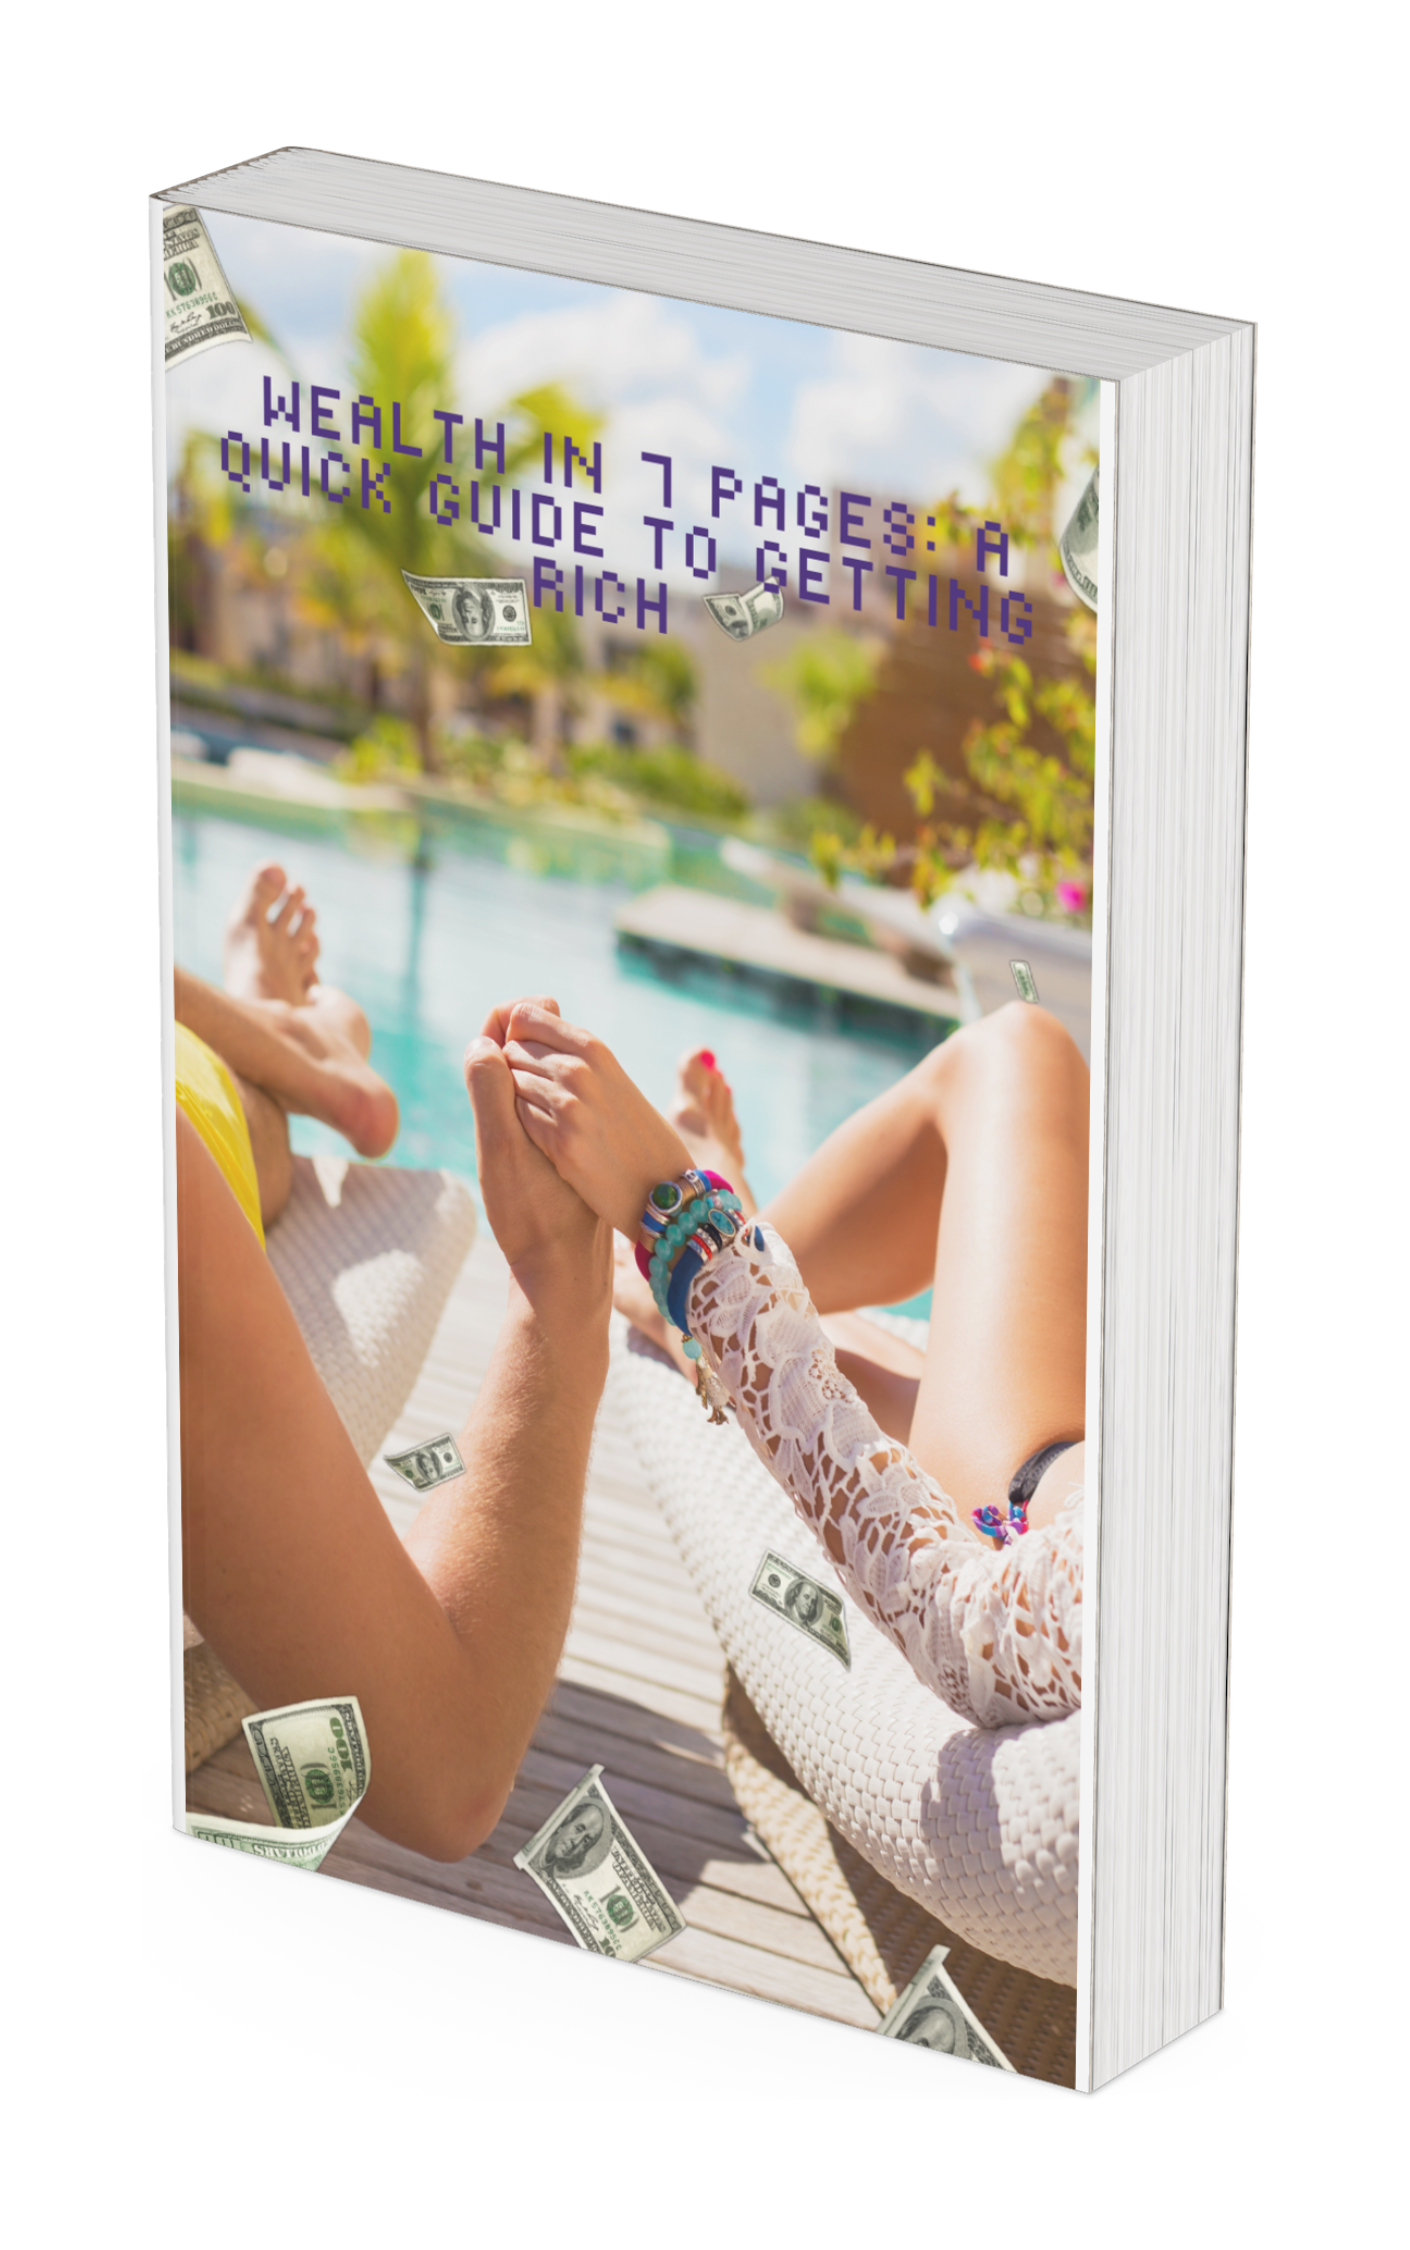 Wealth in 7 Pages: A Quick Guide to Getting Rich